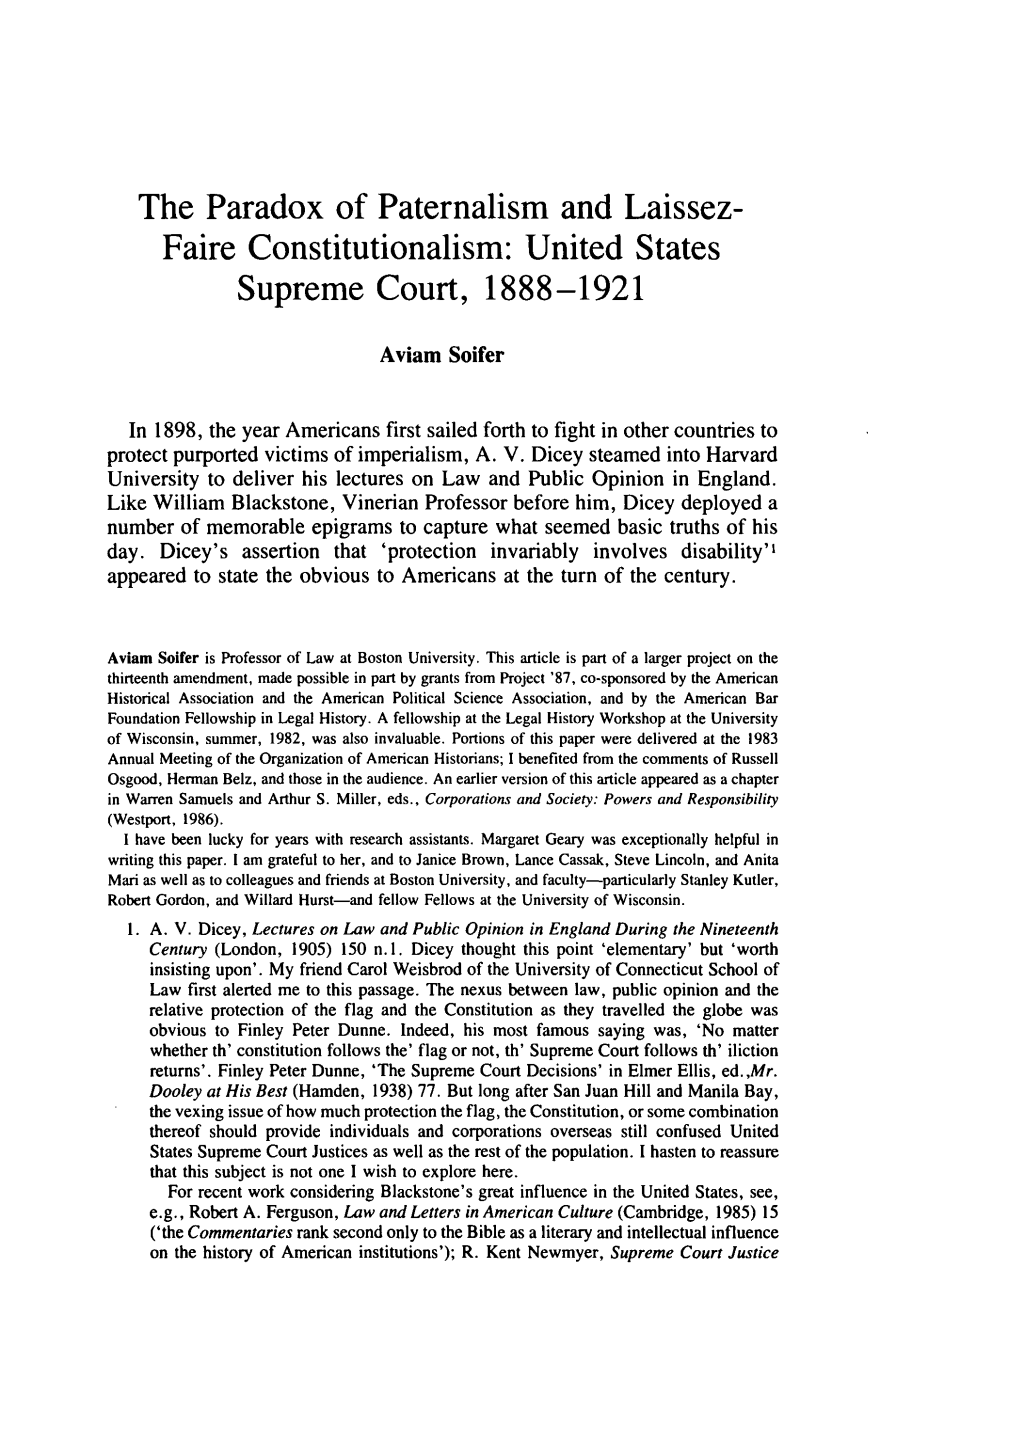 The Paradox of Paternalism and Laissez- Faire Constitutionalism: United States Supreme Court, 1888-1921